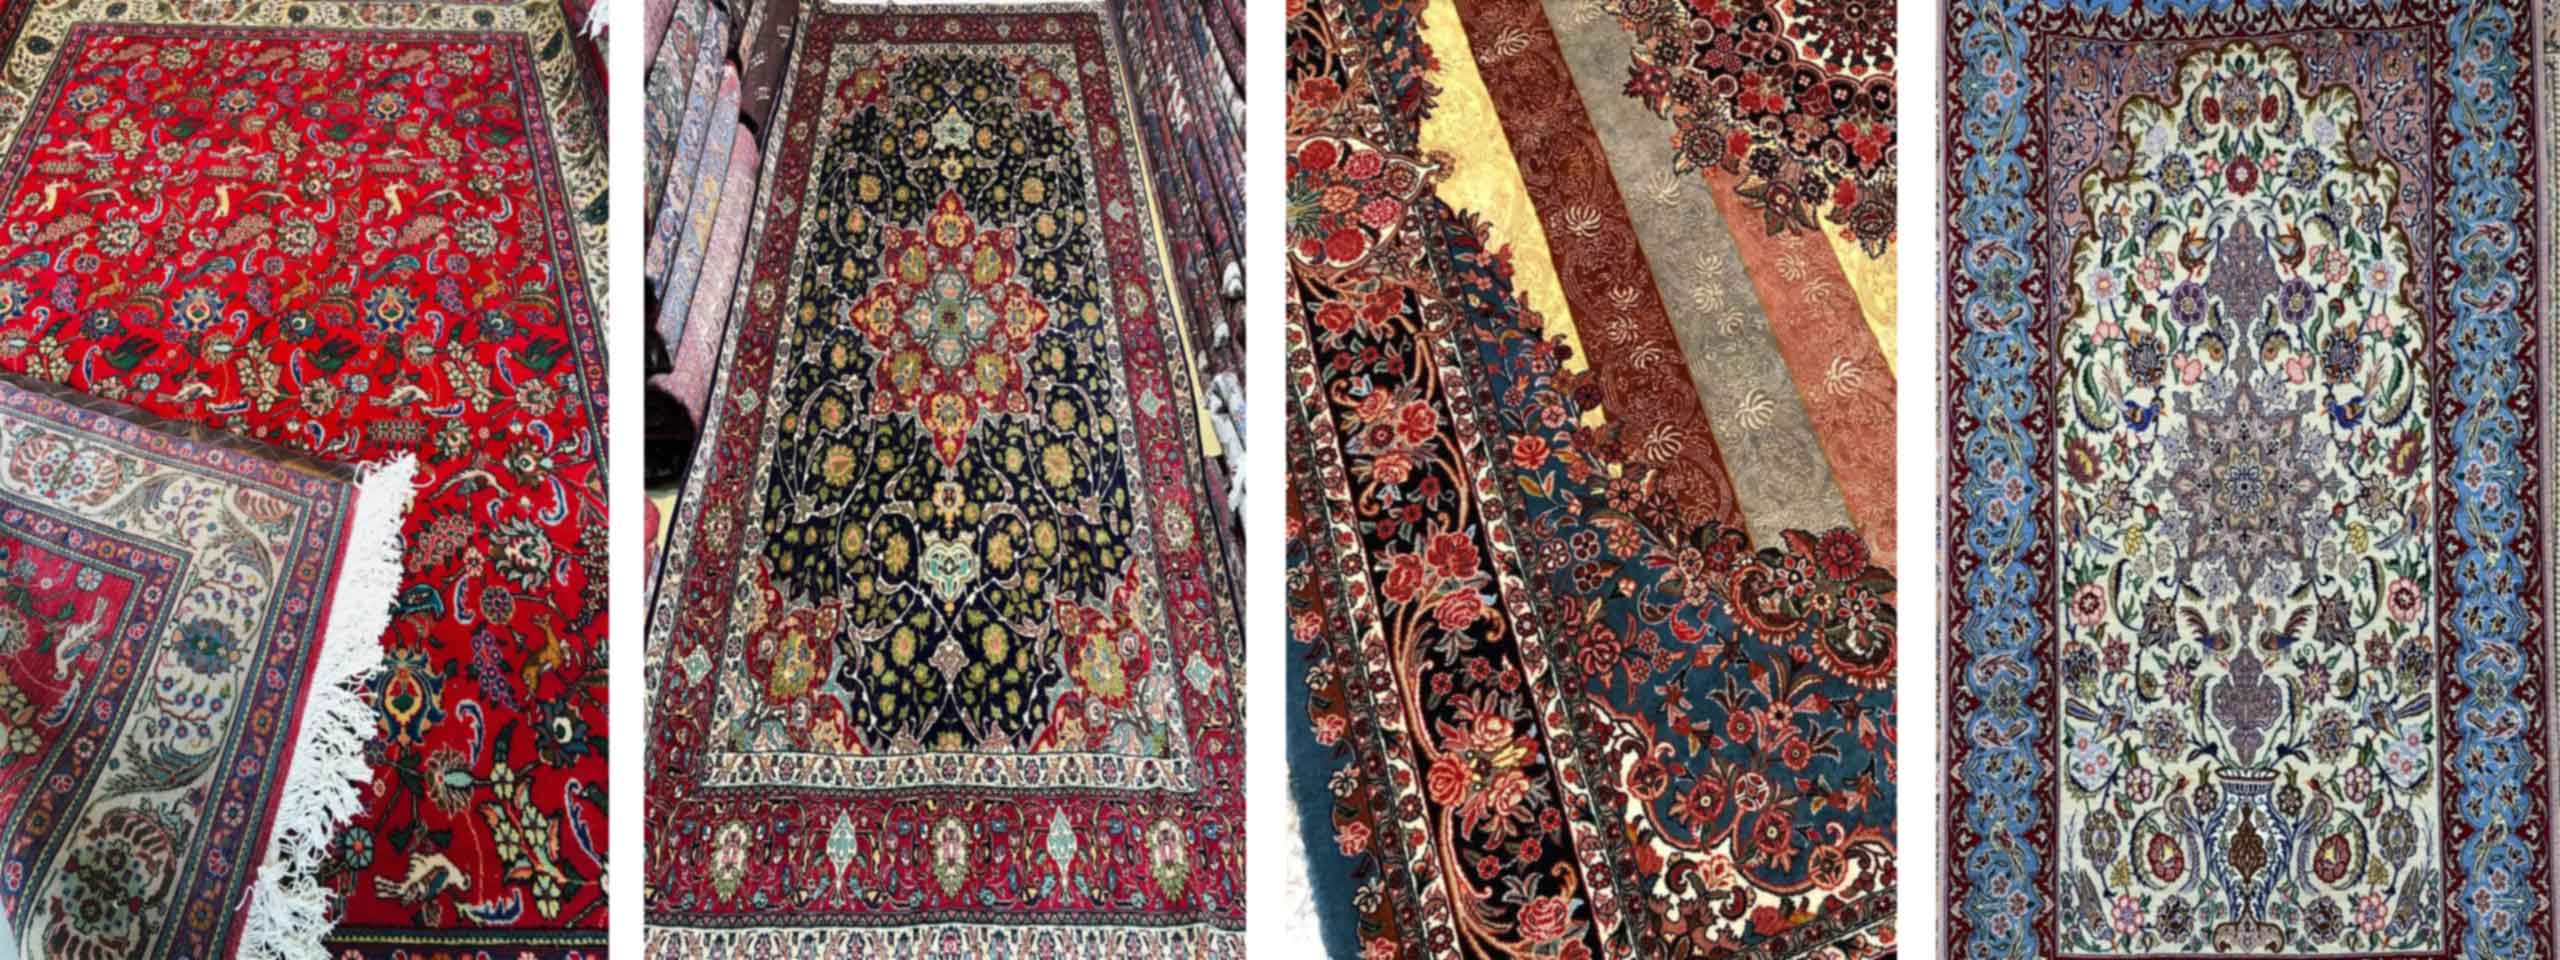 Persian rug designs: What are the 19 main categories of Persian rugs in terms of design?